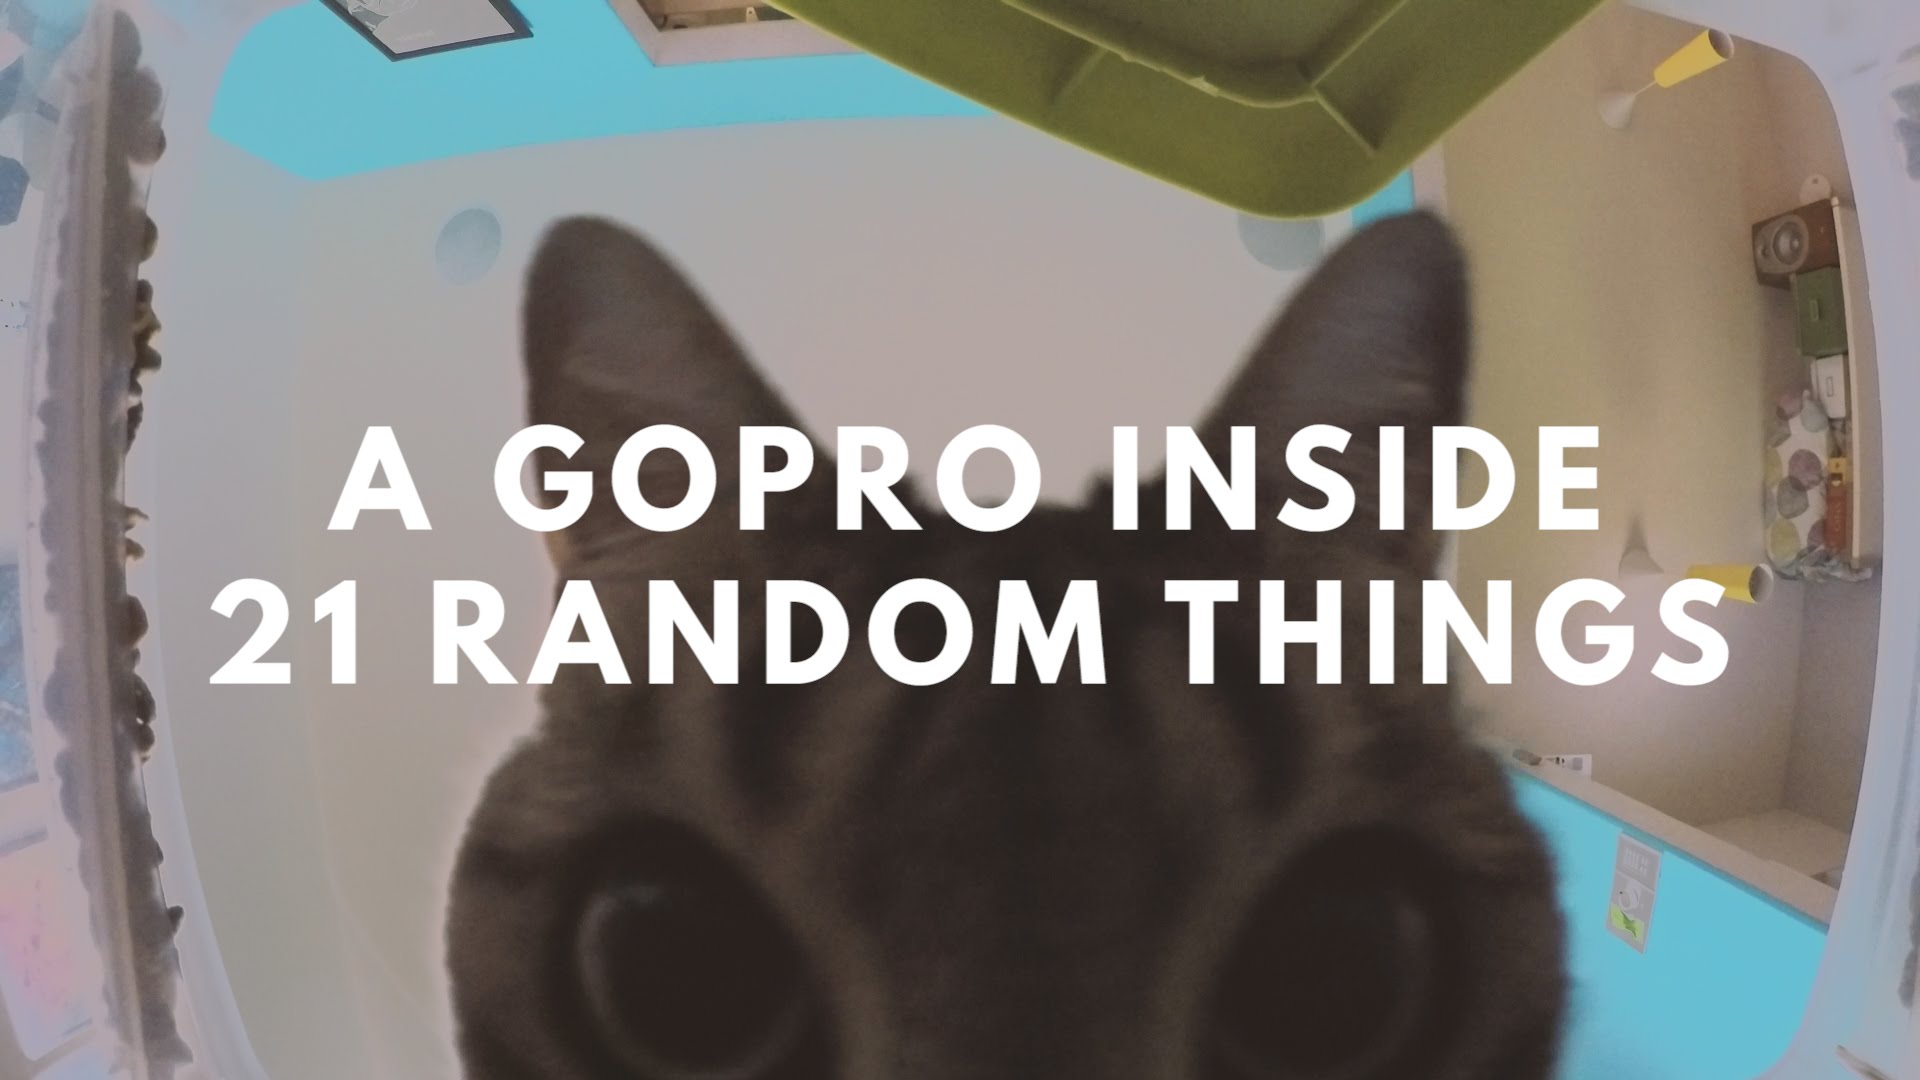 charmaine paterson recommends How To Hide A Gopro In A Room